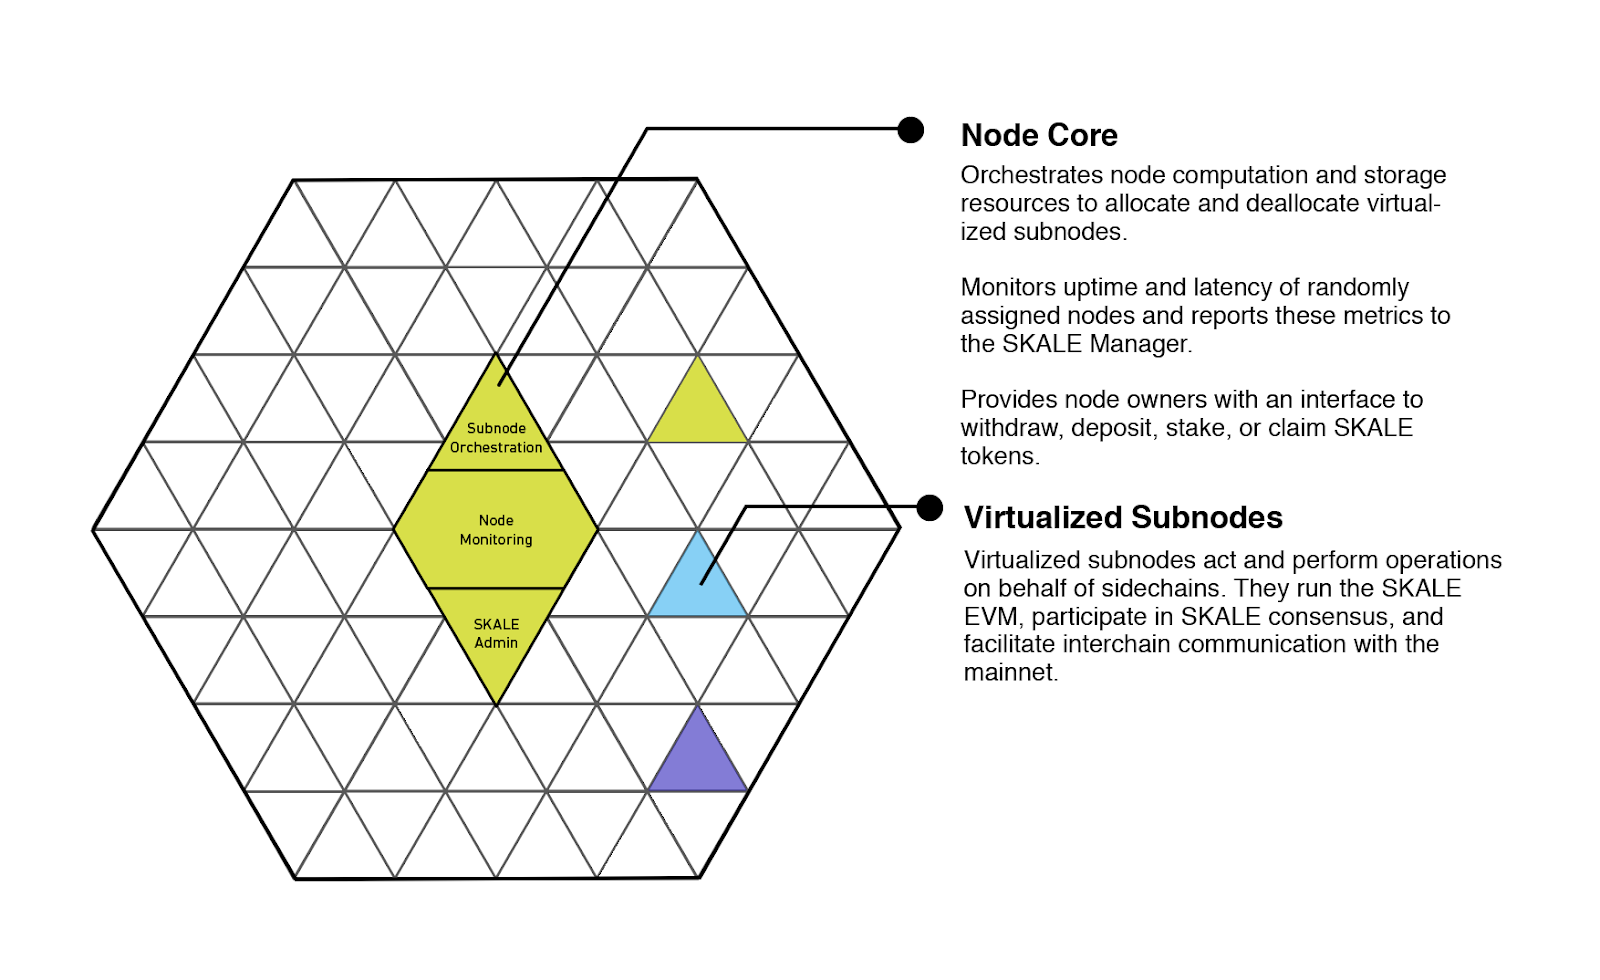 Validator Nodes Consist of Virtualized Subnodes and a Node Core